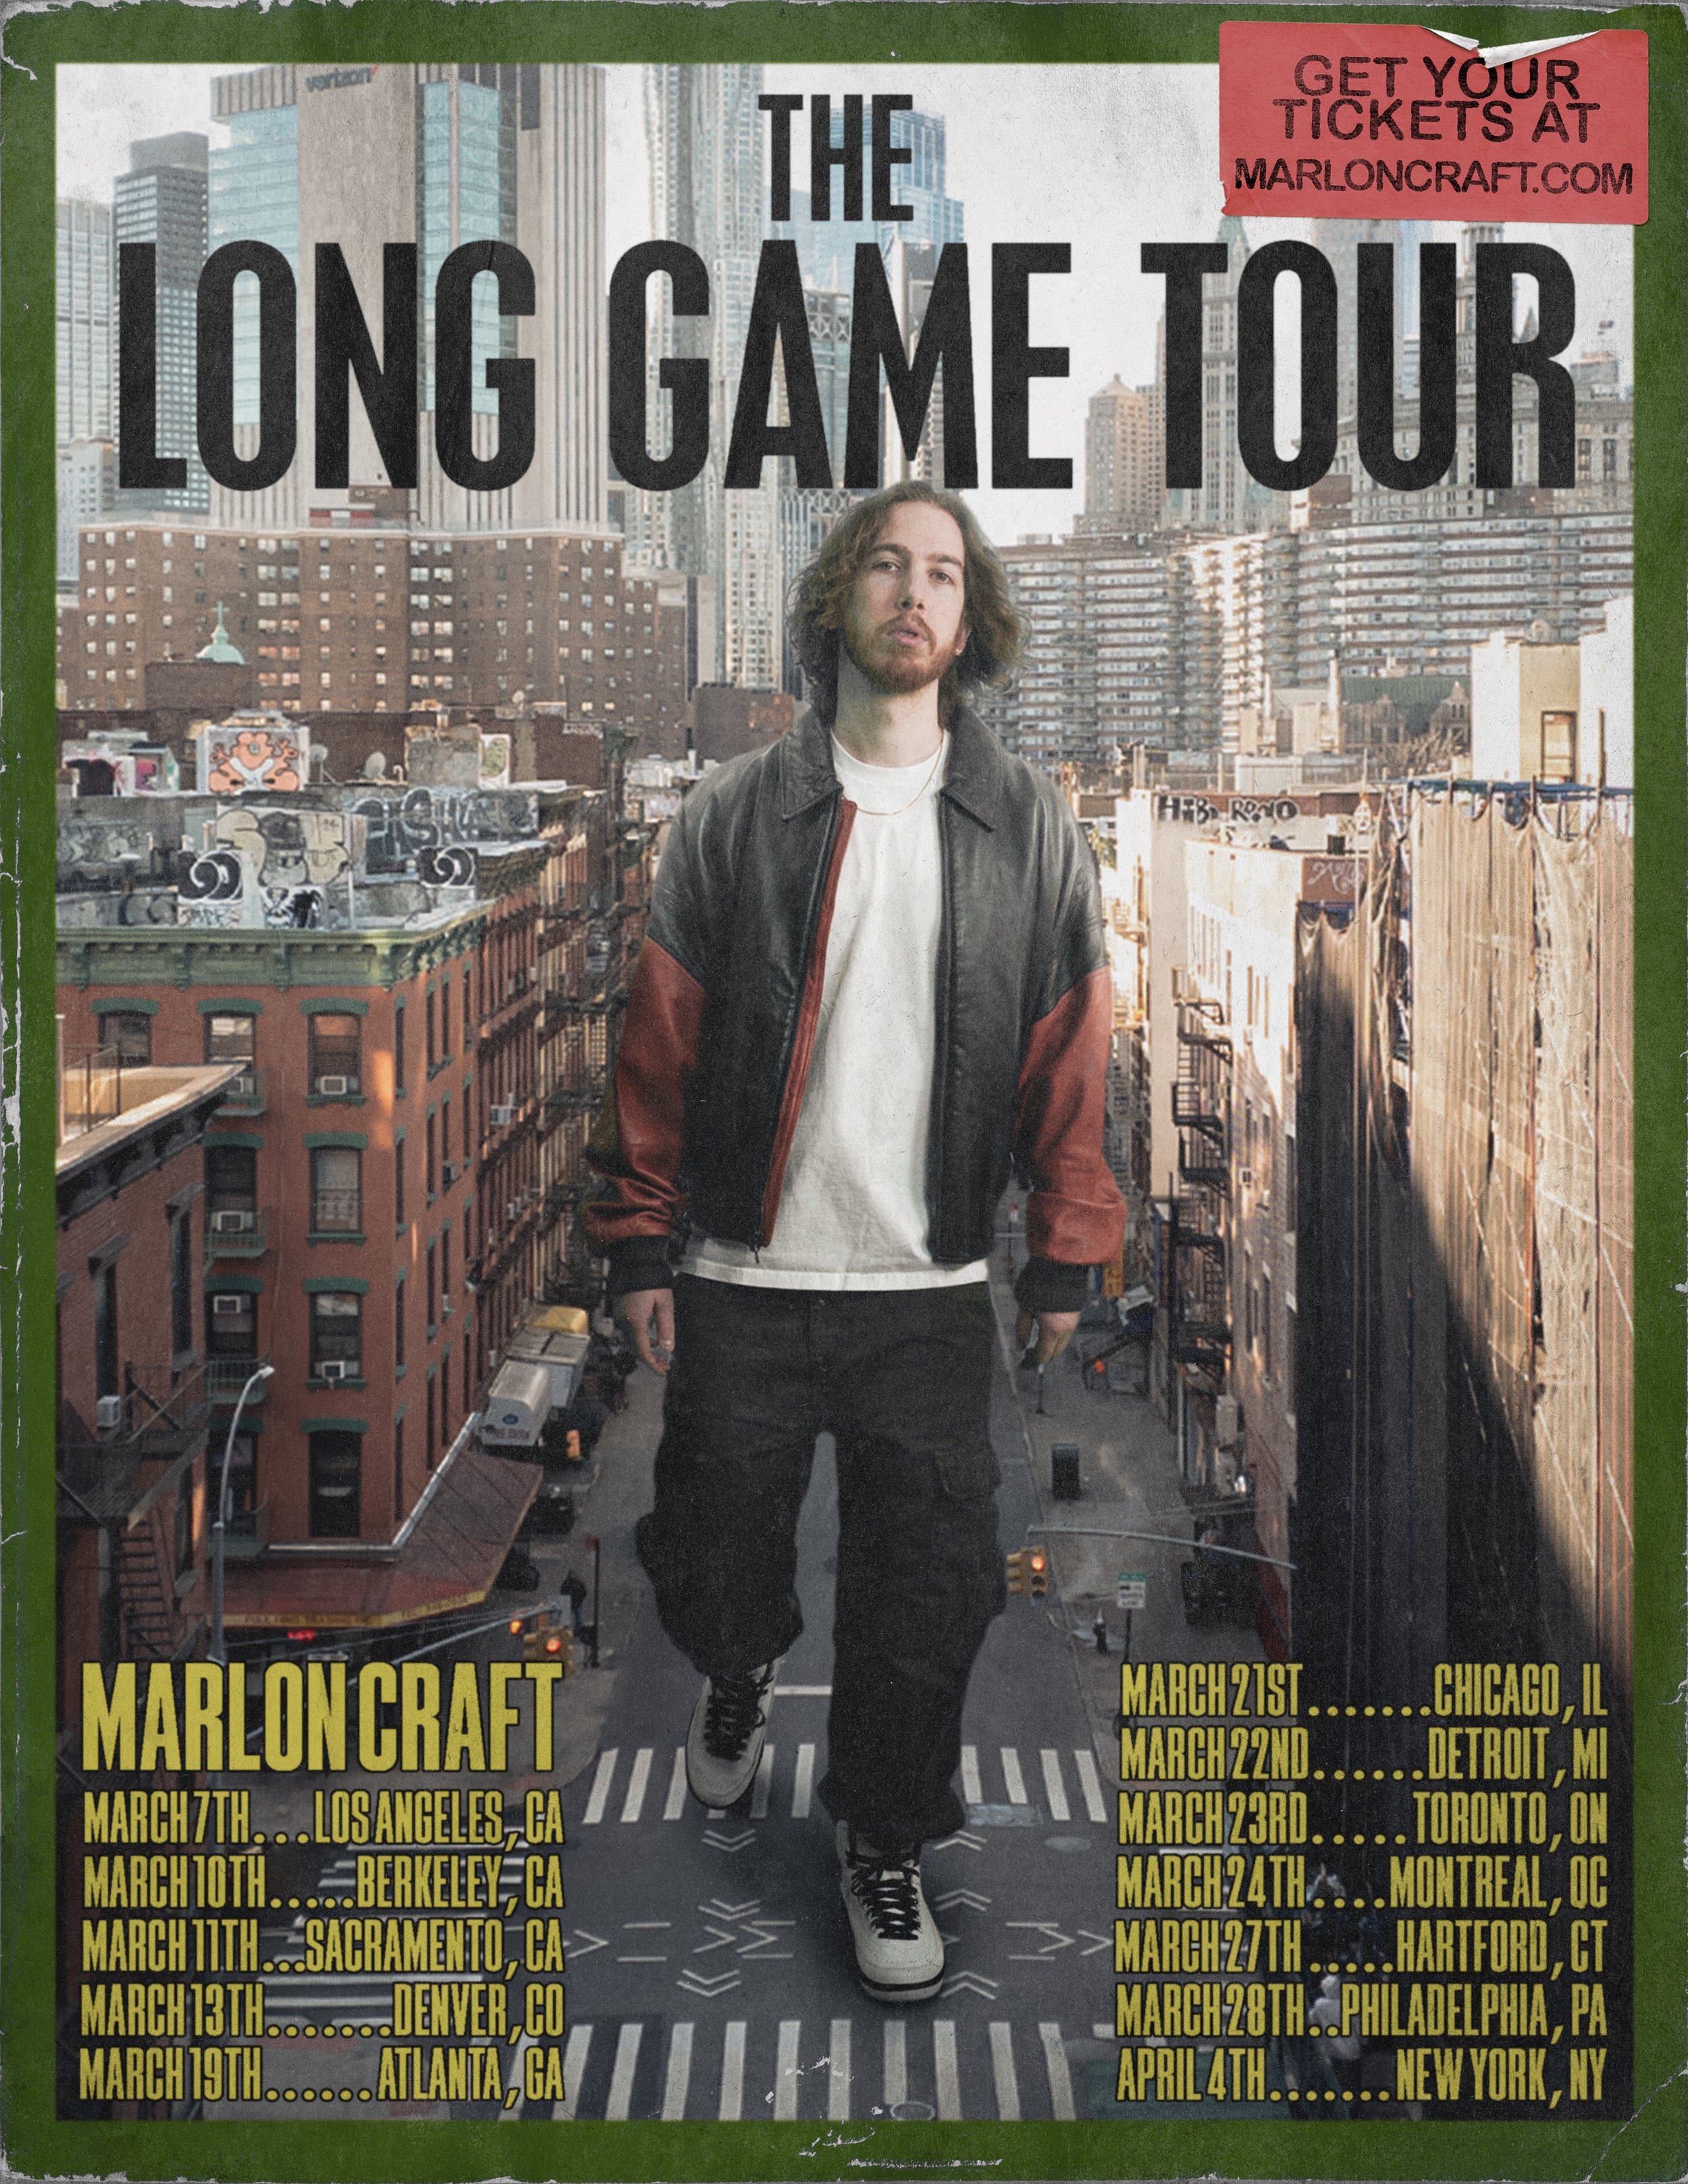 Photos and Design of Marlon Craft's "The Long Game Tour" poster